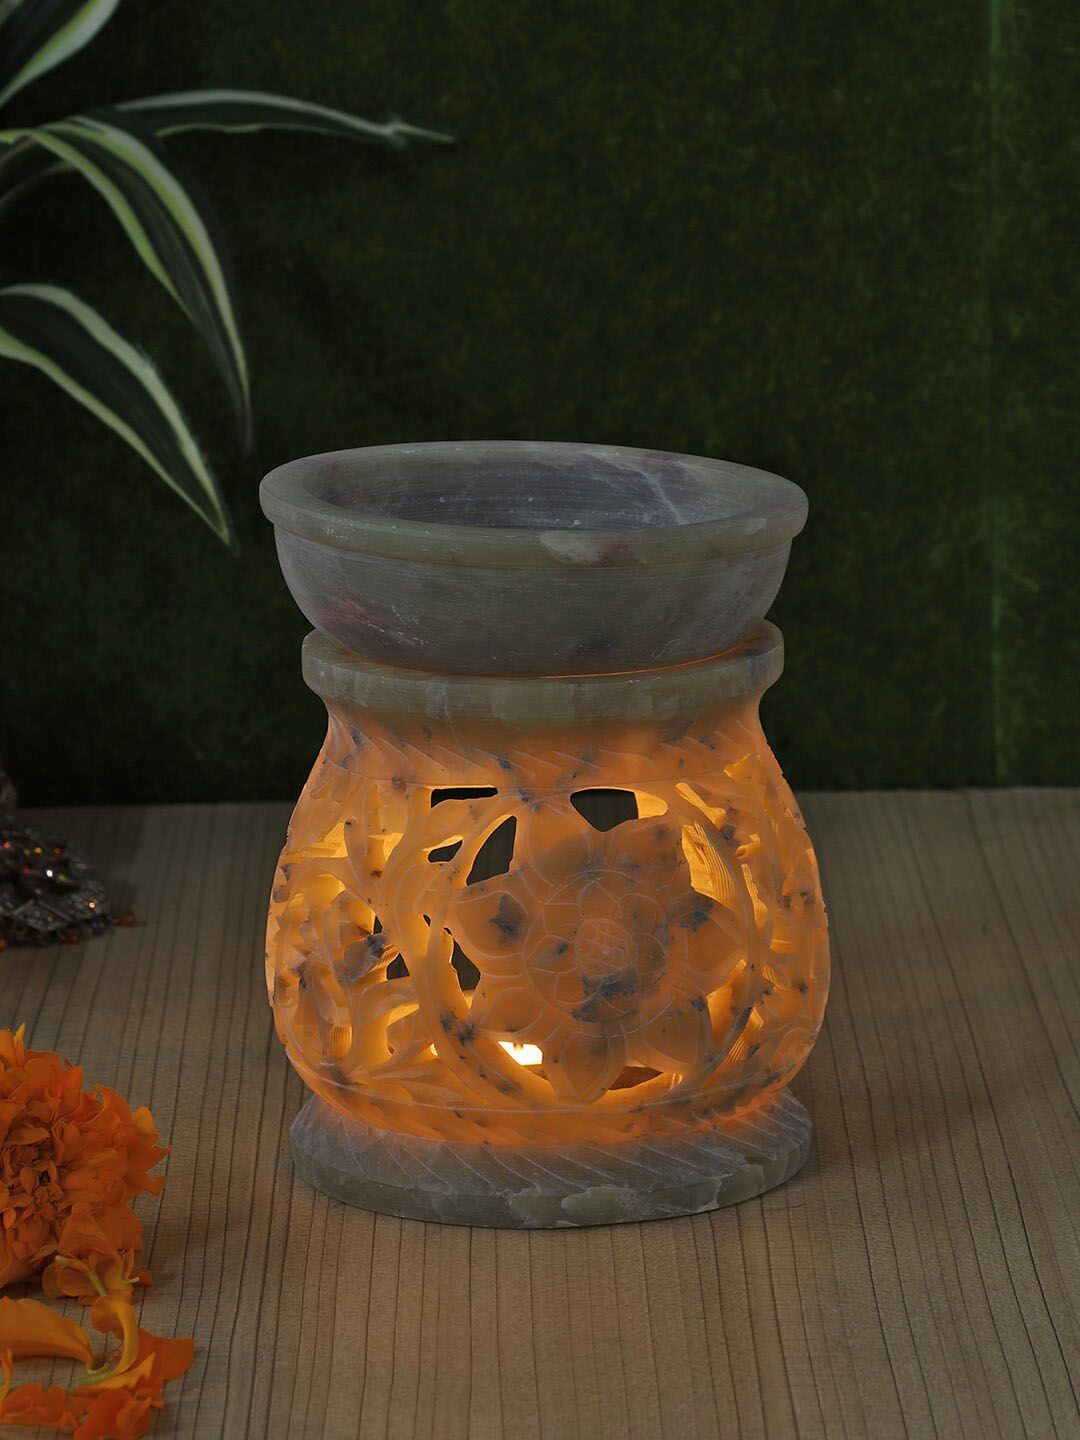 Aapno Rajasthan Soapstone Oil Diffuser Price in India